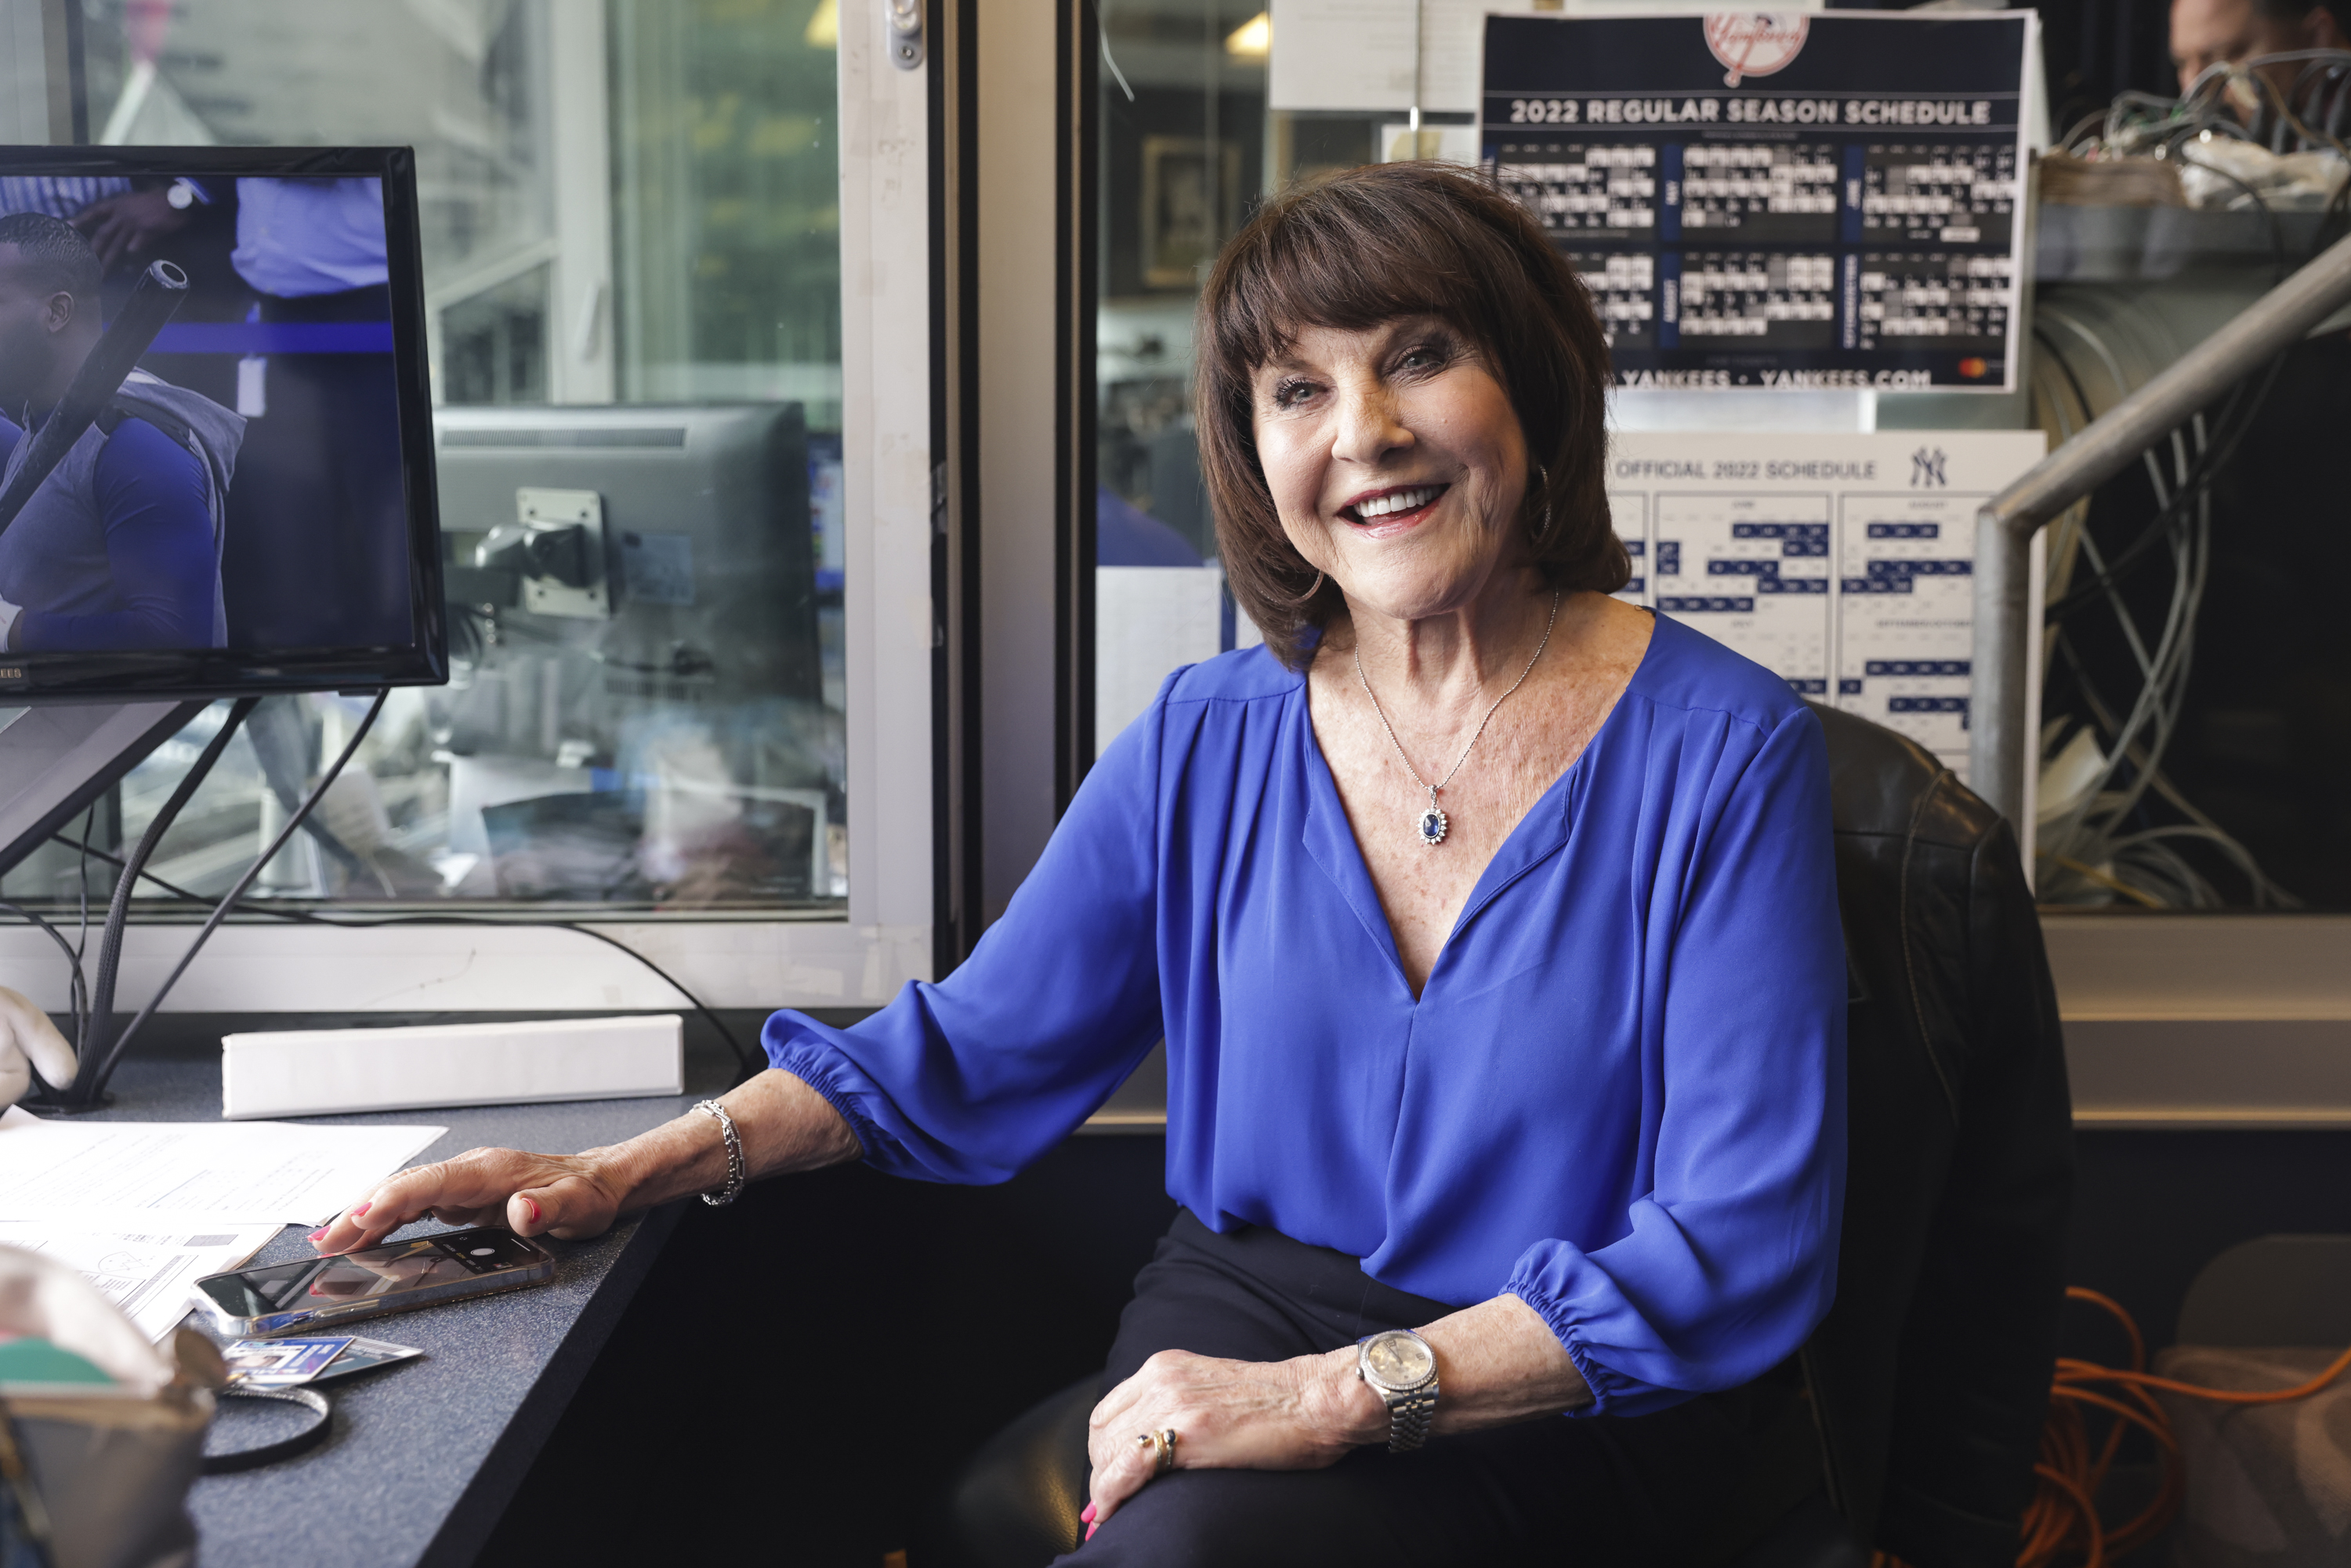 Yankees Broadcaster Suzyn Waldman Picked for Radio Hall of Fame